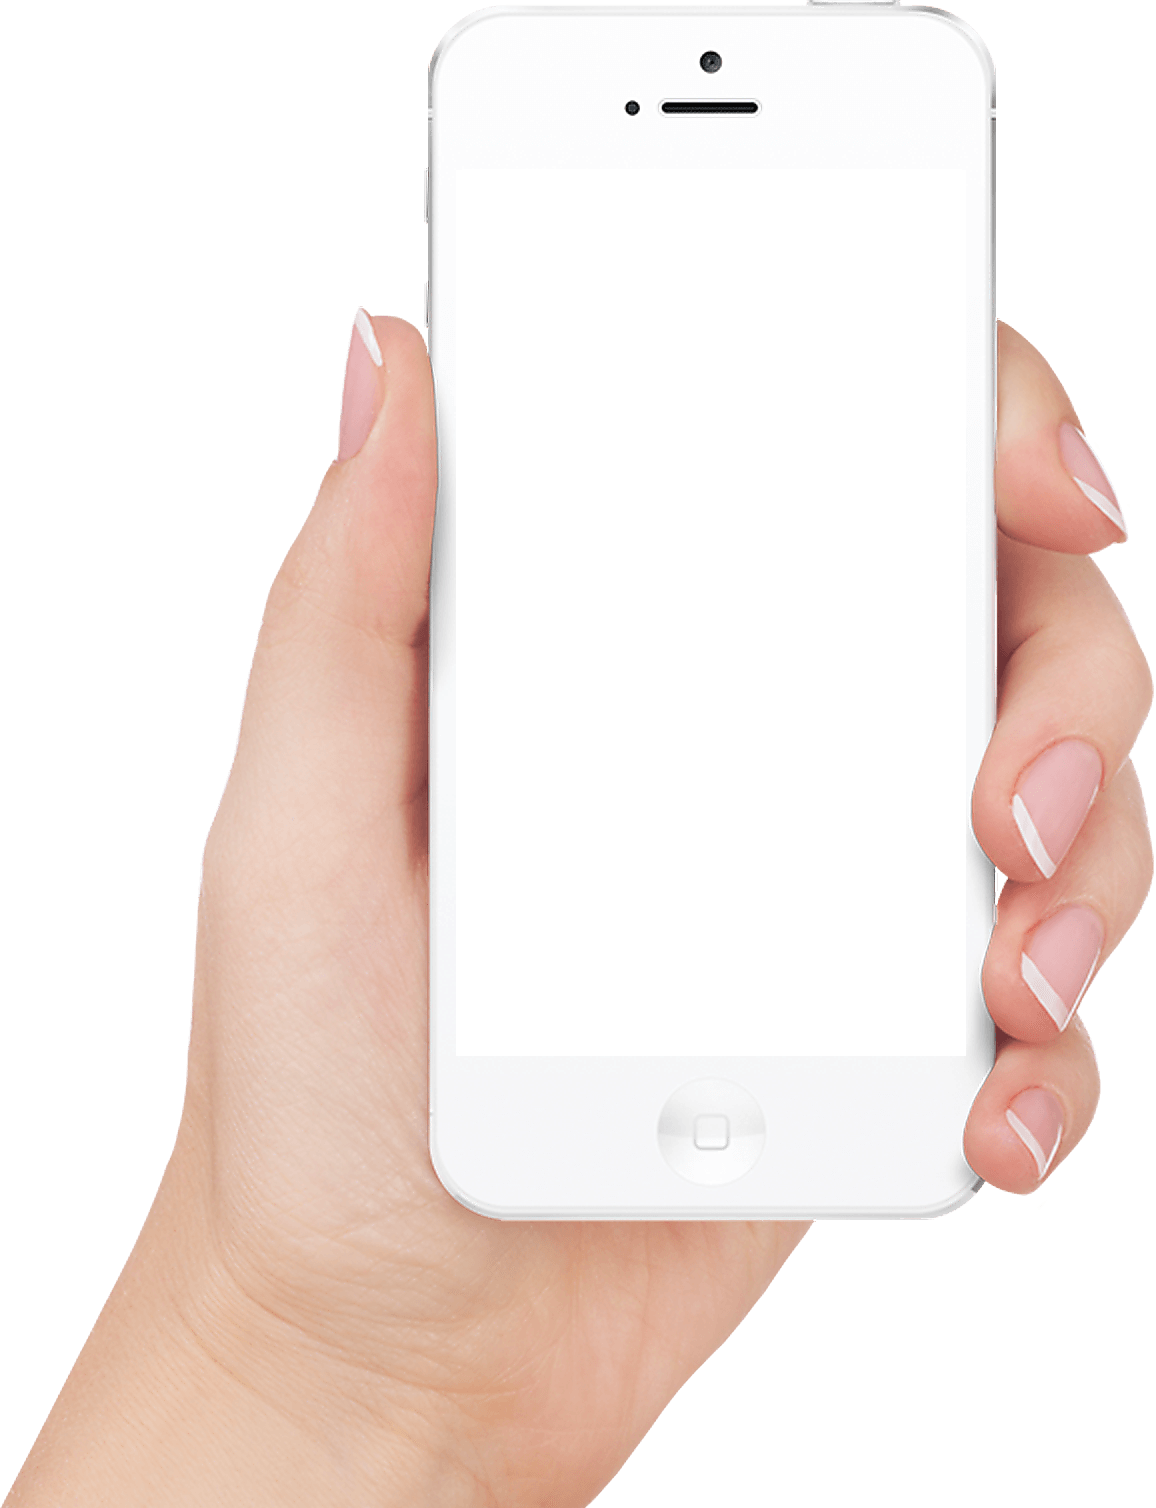 White Iphone In Hand Transparent Png Image PNG Image